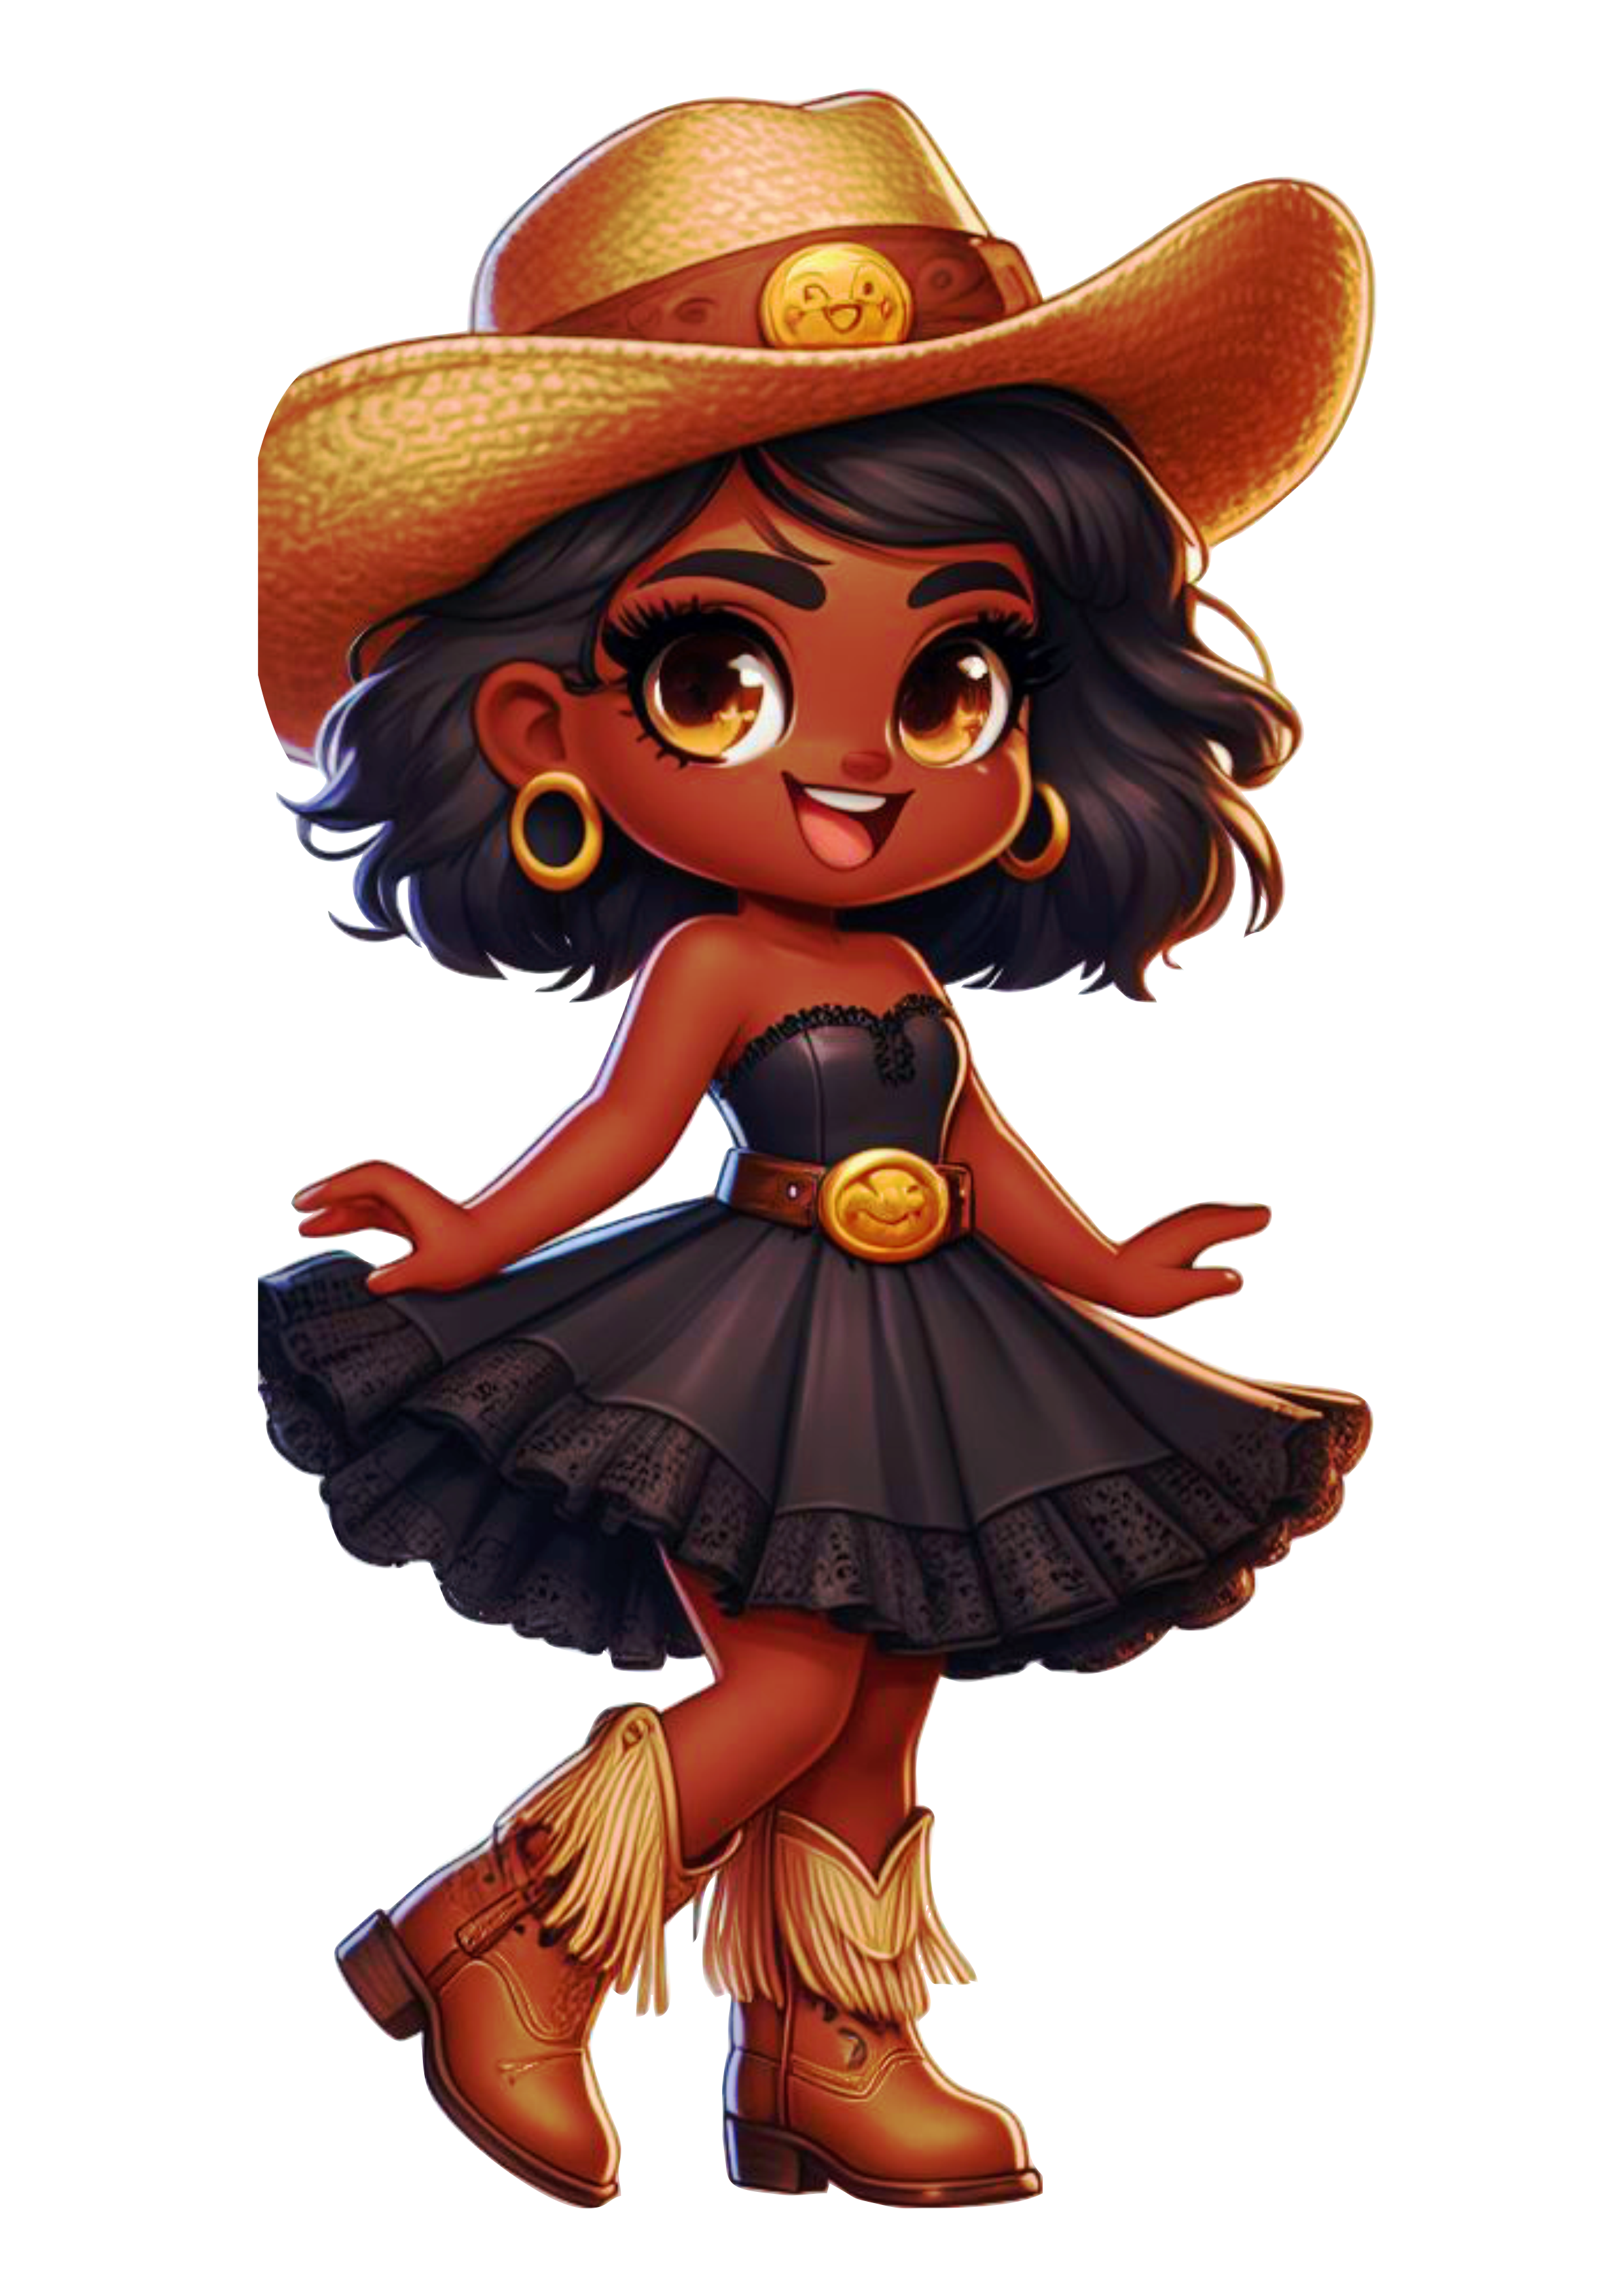 Pack of images Festa Junina São João girl in dress and braids hat and boots cute drawing free png